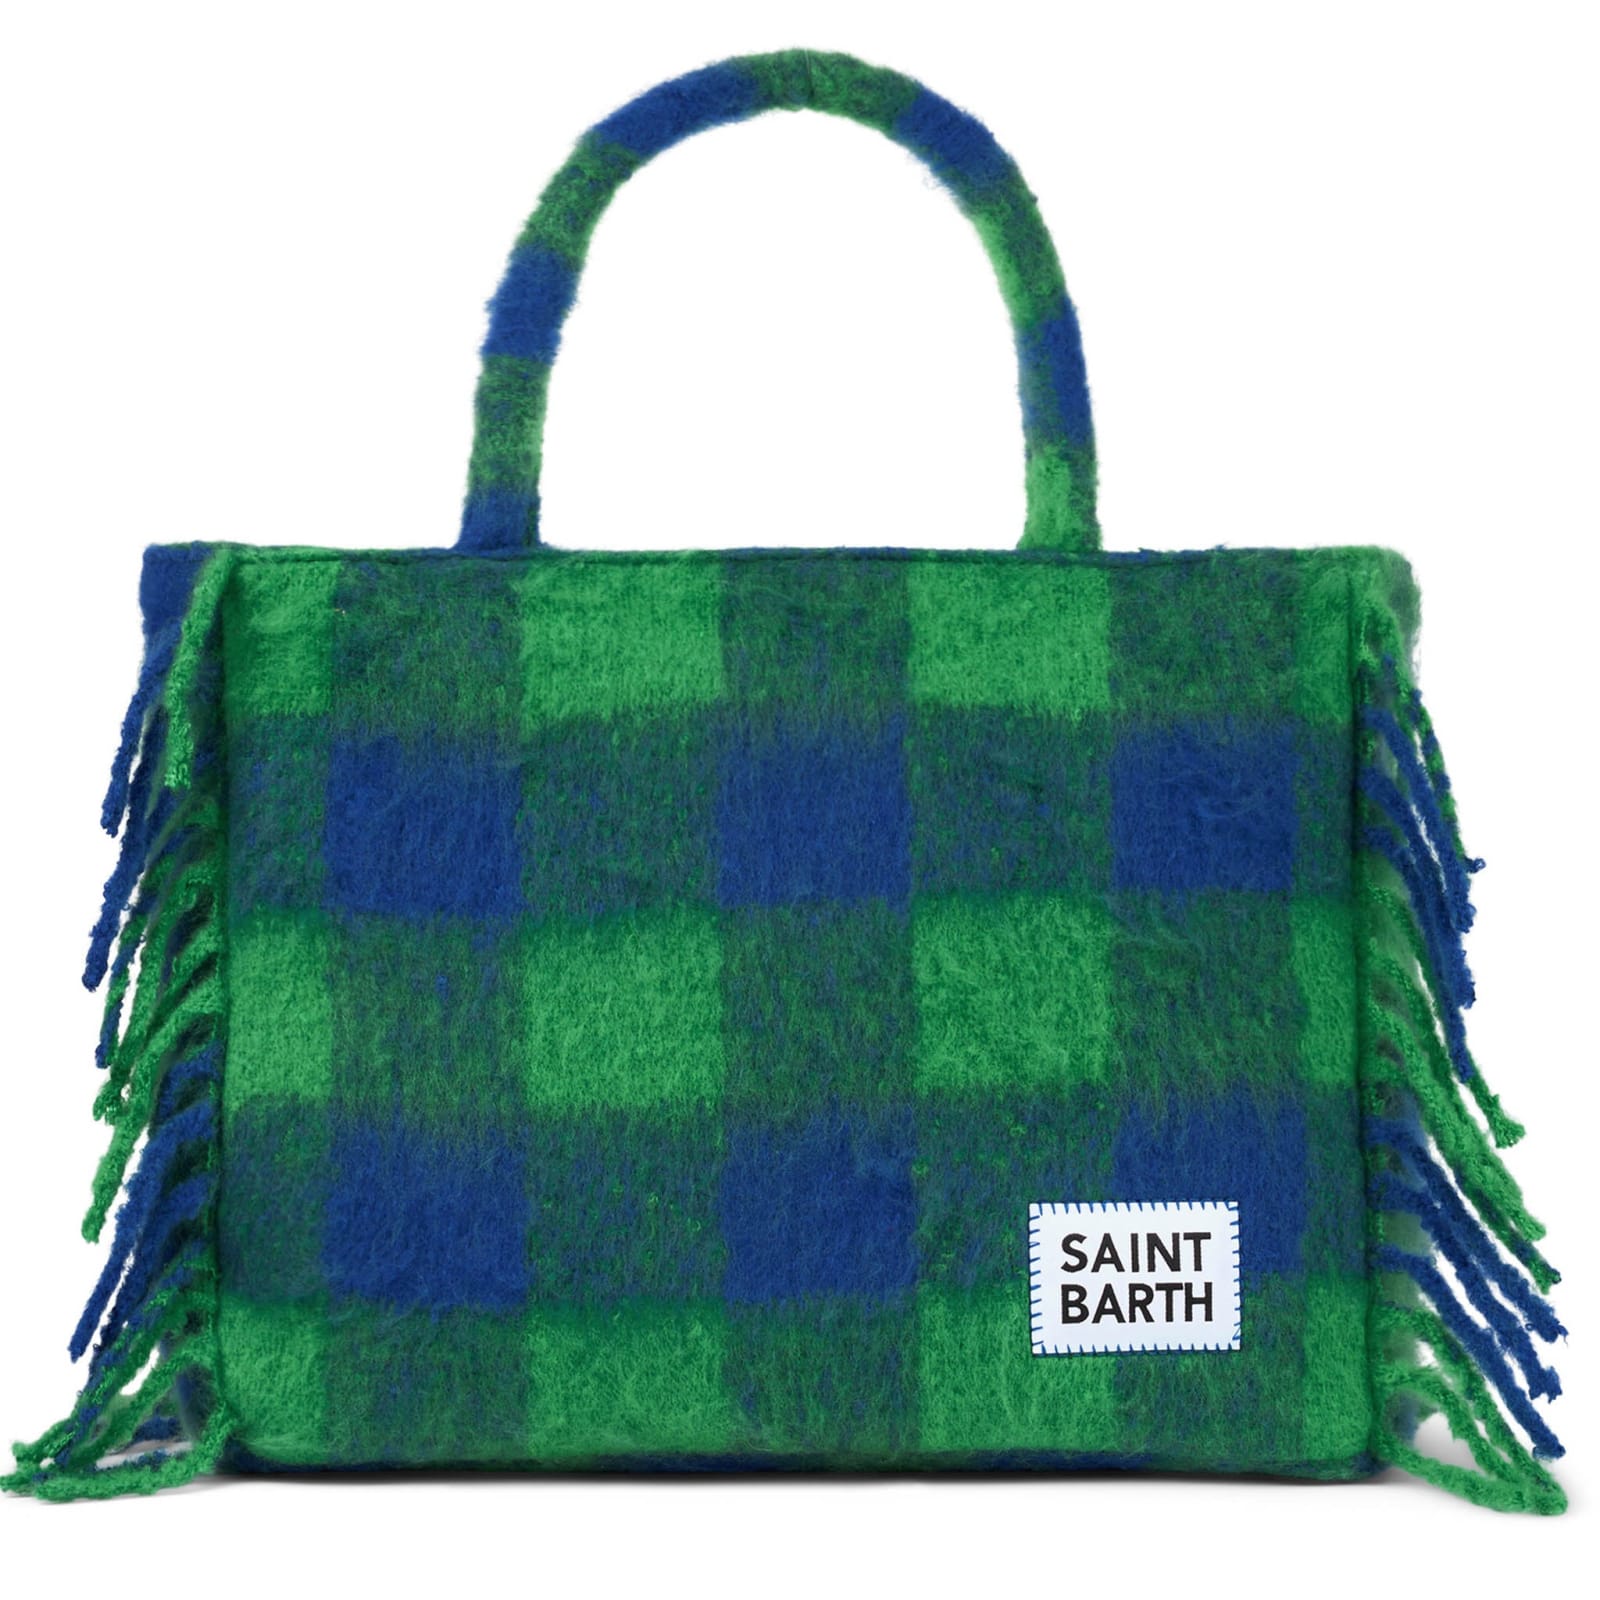 Mc2 Saint Barth Vanity Blanket Shoulder Bag With Green And Blue Check In Multicolor